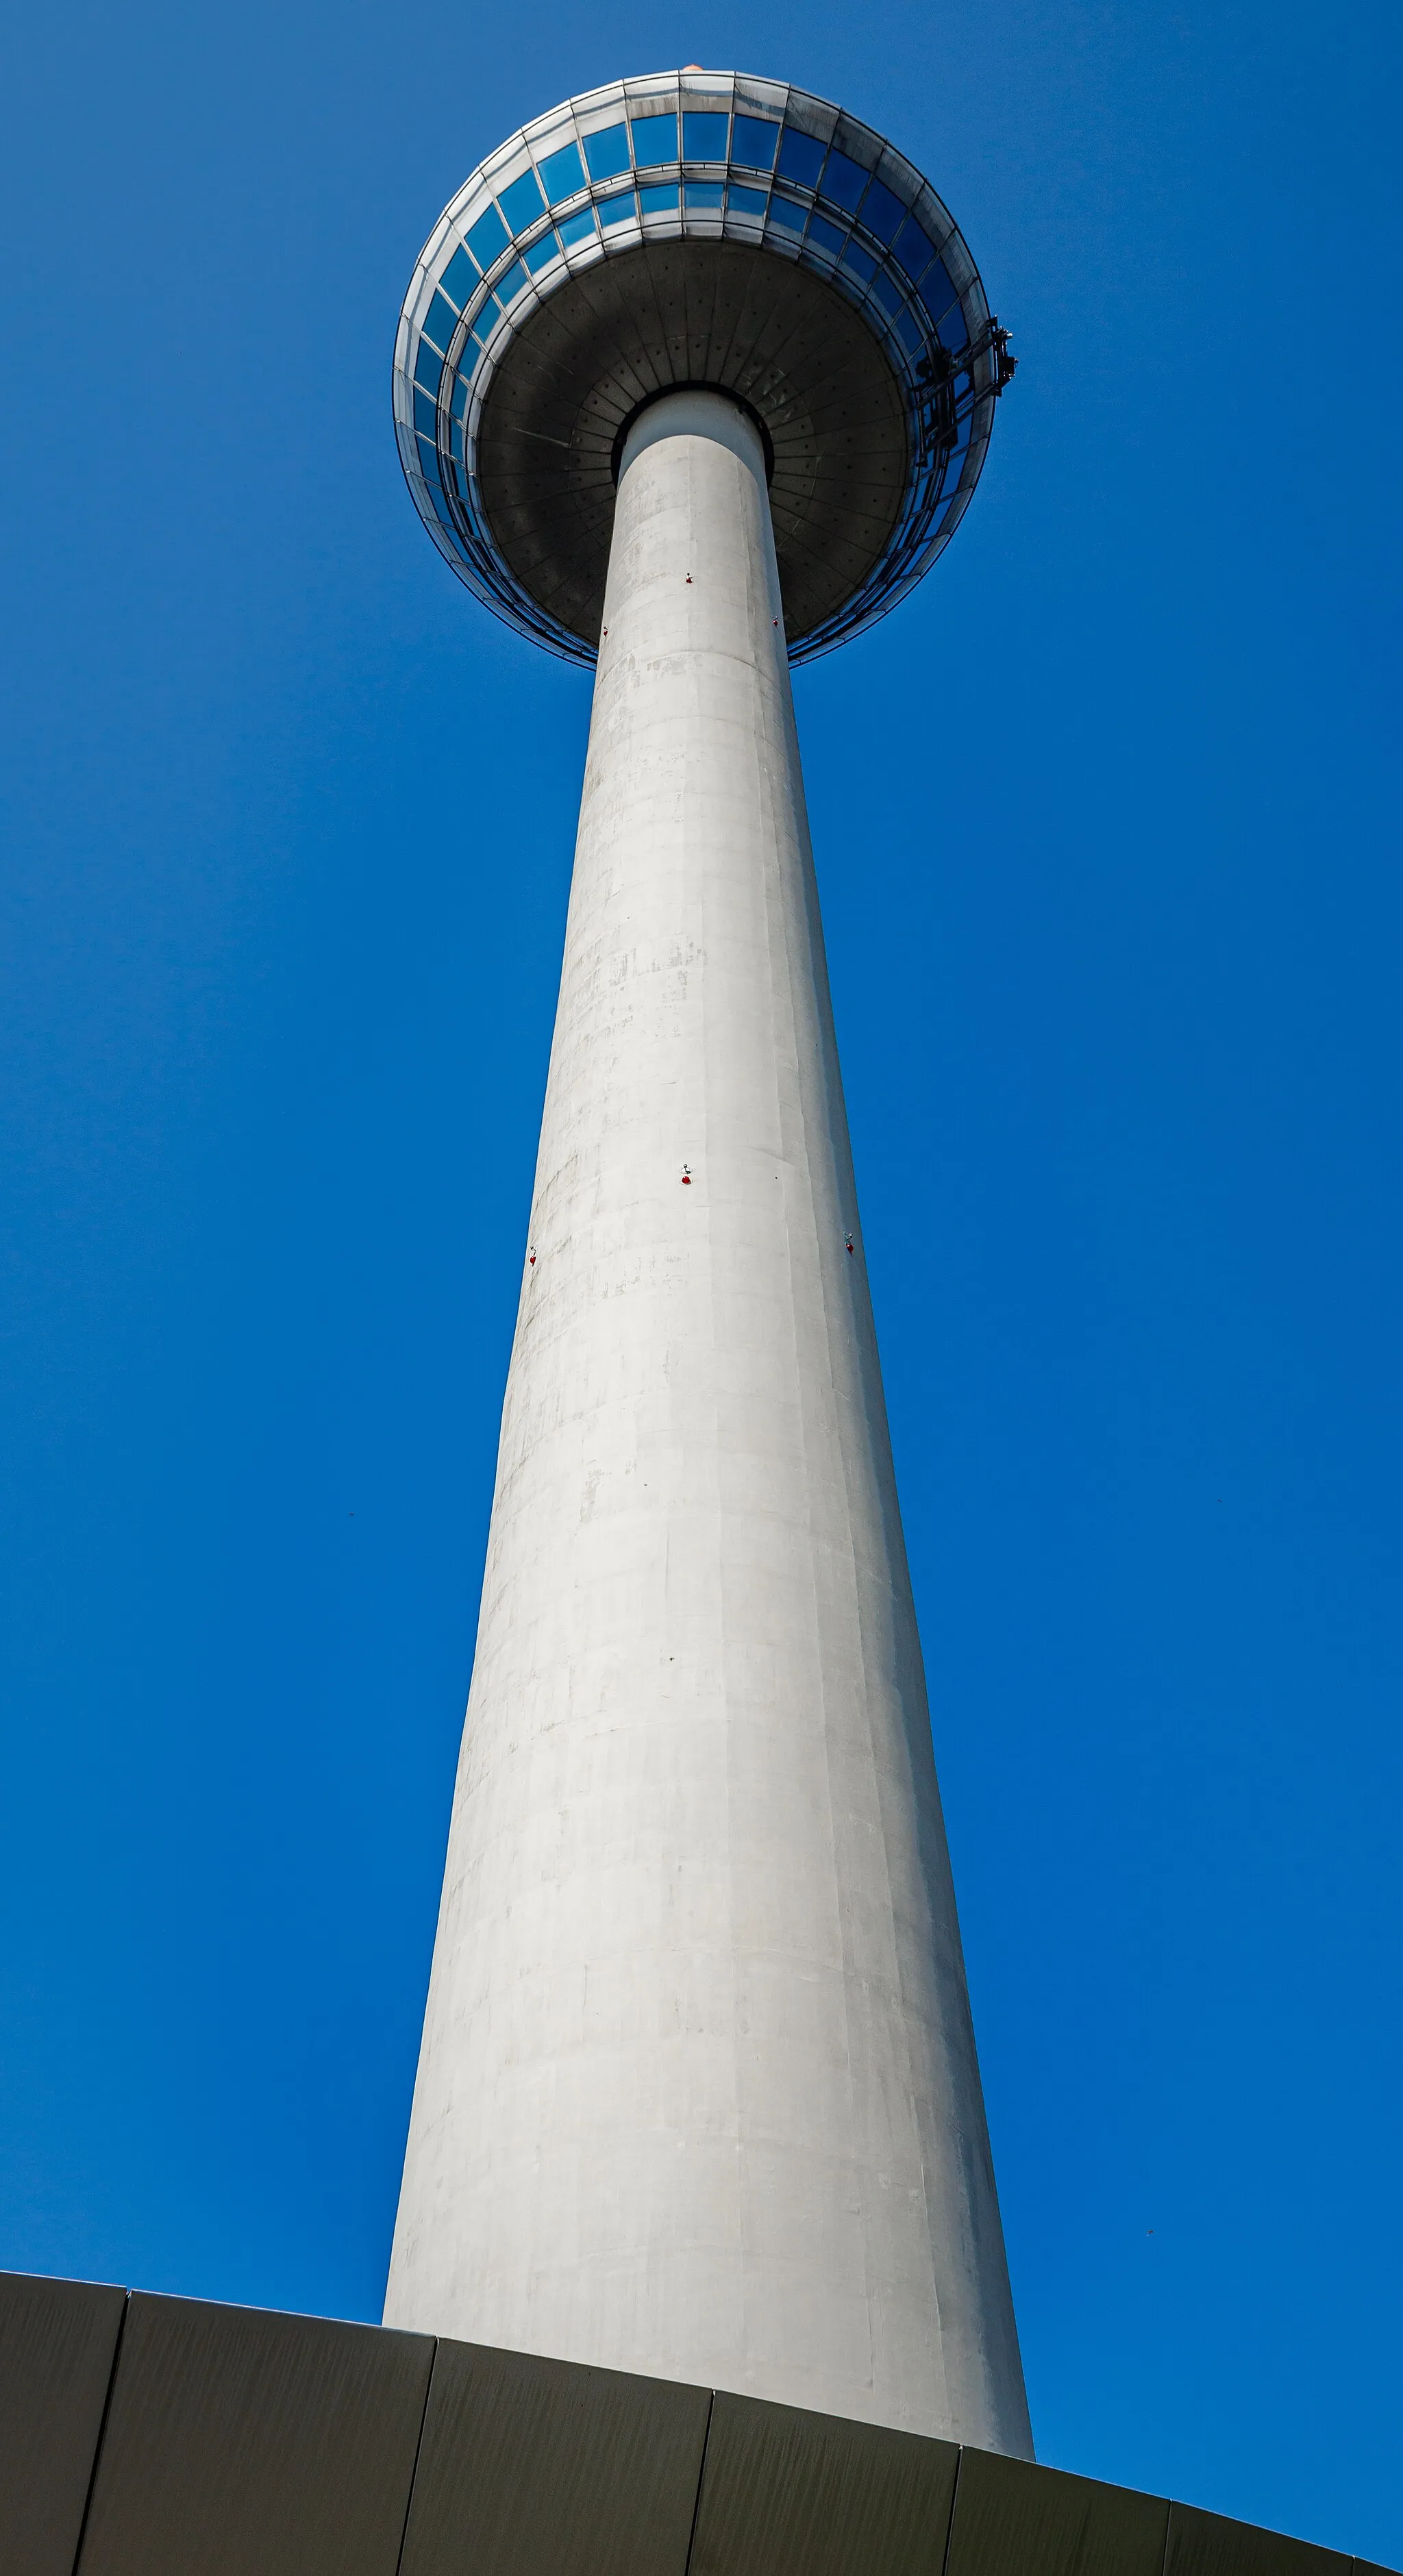 Photo showing: The Fernmeldeturm Mannheim (telecommunication tower) with revolving restaurant from below

Television tower: Fernmeldeturm Mannheim
Title
Fernmeldeturm Mannheim
Instance of
television tower, observation tower and restaurant
Architect
Erwin Heinle
Made from material
reinforced concrete, steel, glass and aluminium
Height
217.8 metre
Significant event
construction (1973 and 1975)
Owned by
Deutsche Funkturm
Located in the administrative territorial entity
Mannheim

Object: Revolving restaurant
Title
Revolving restaurant